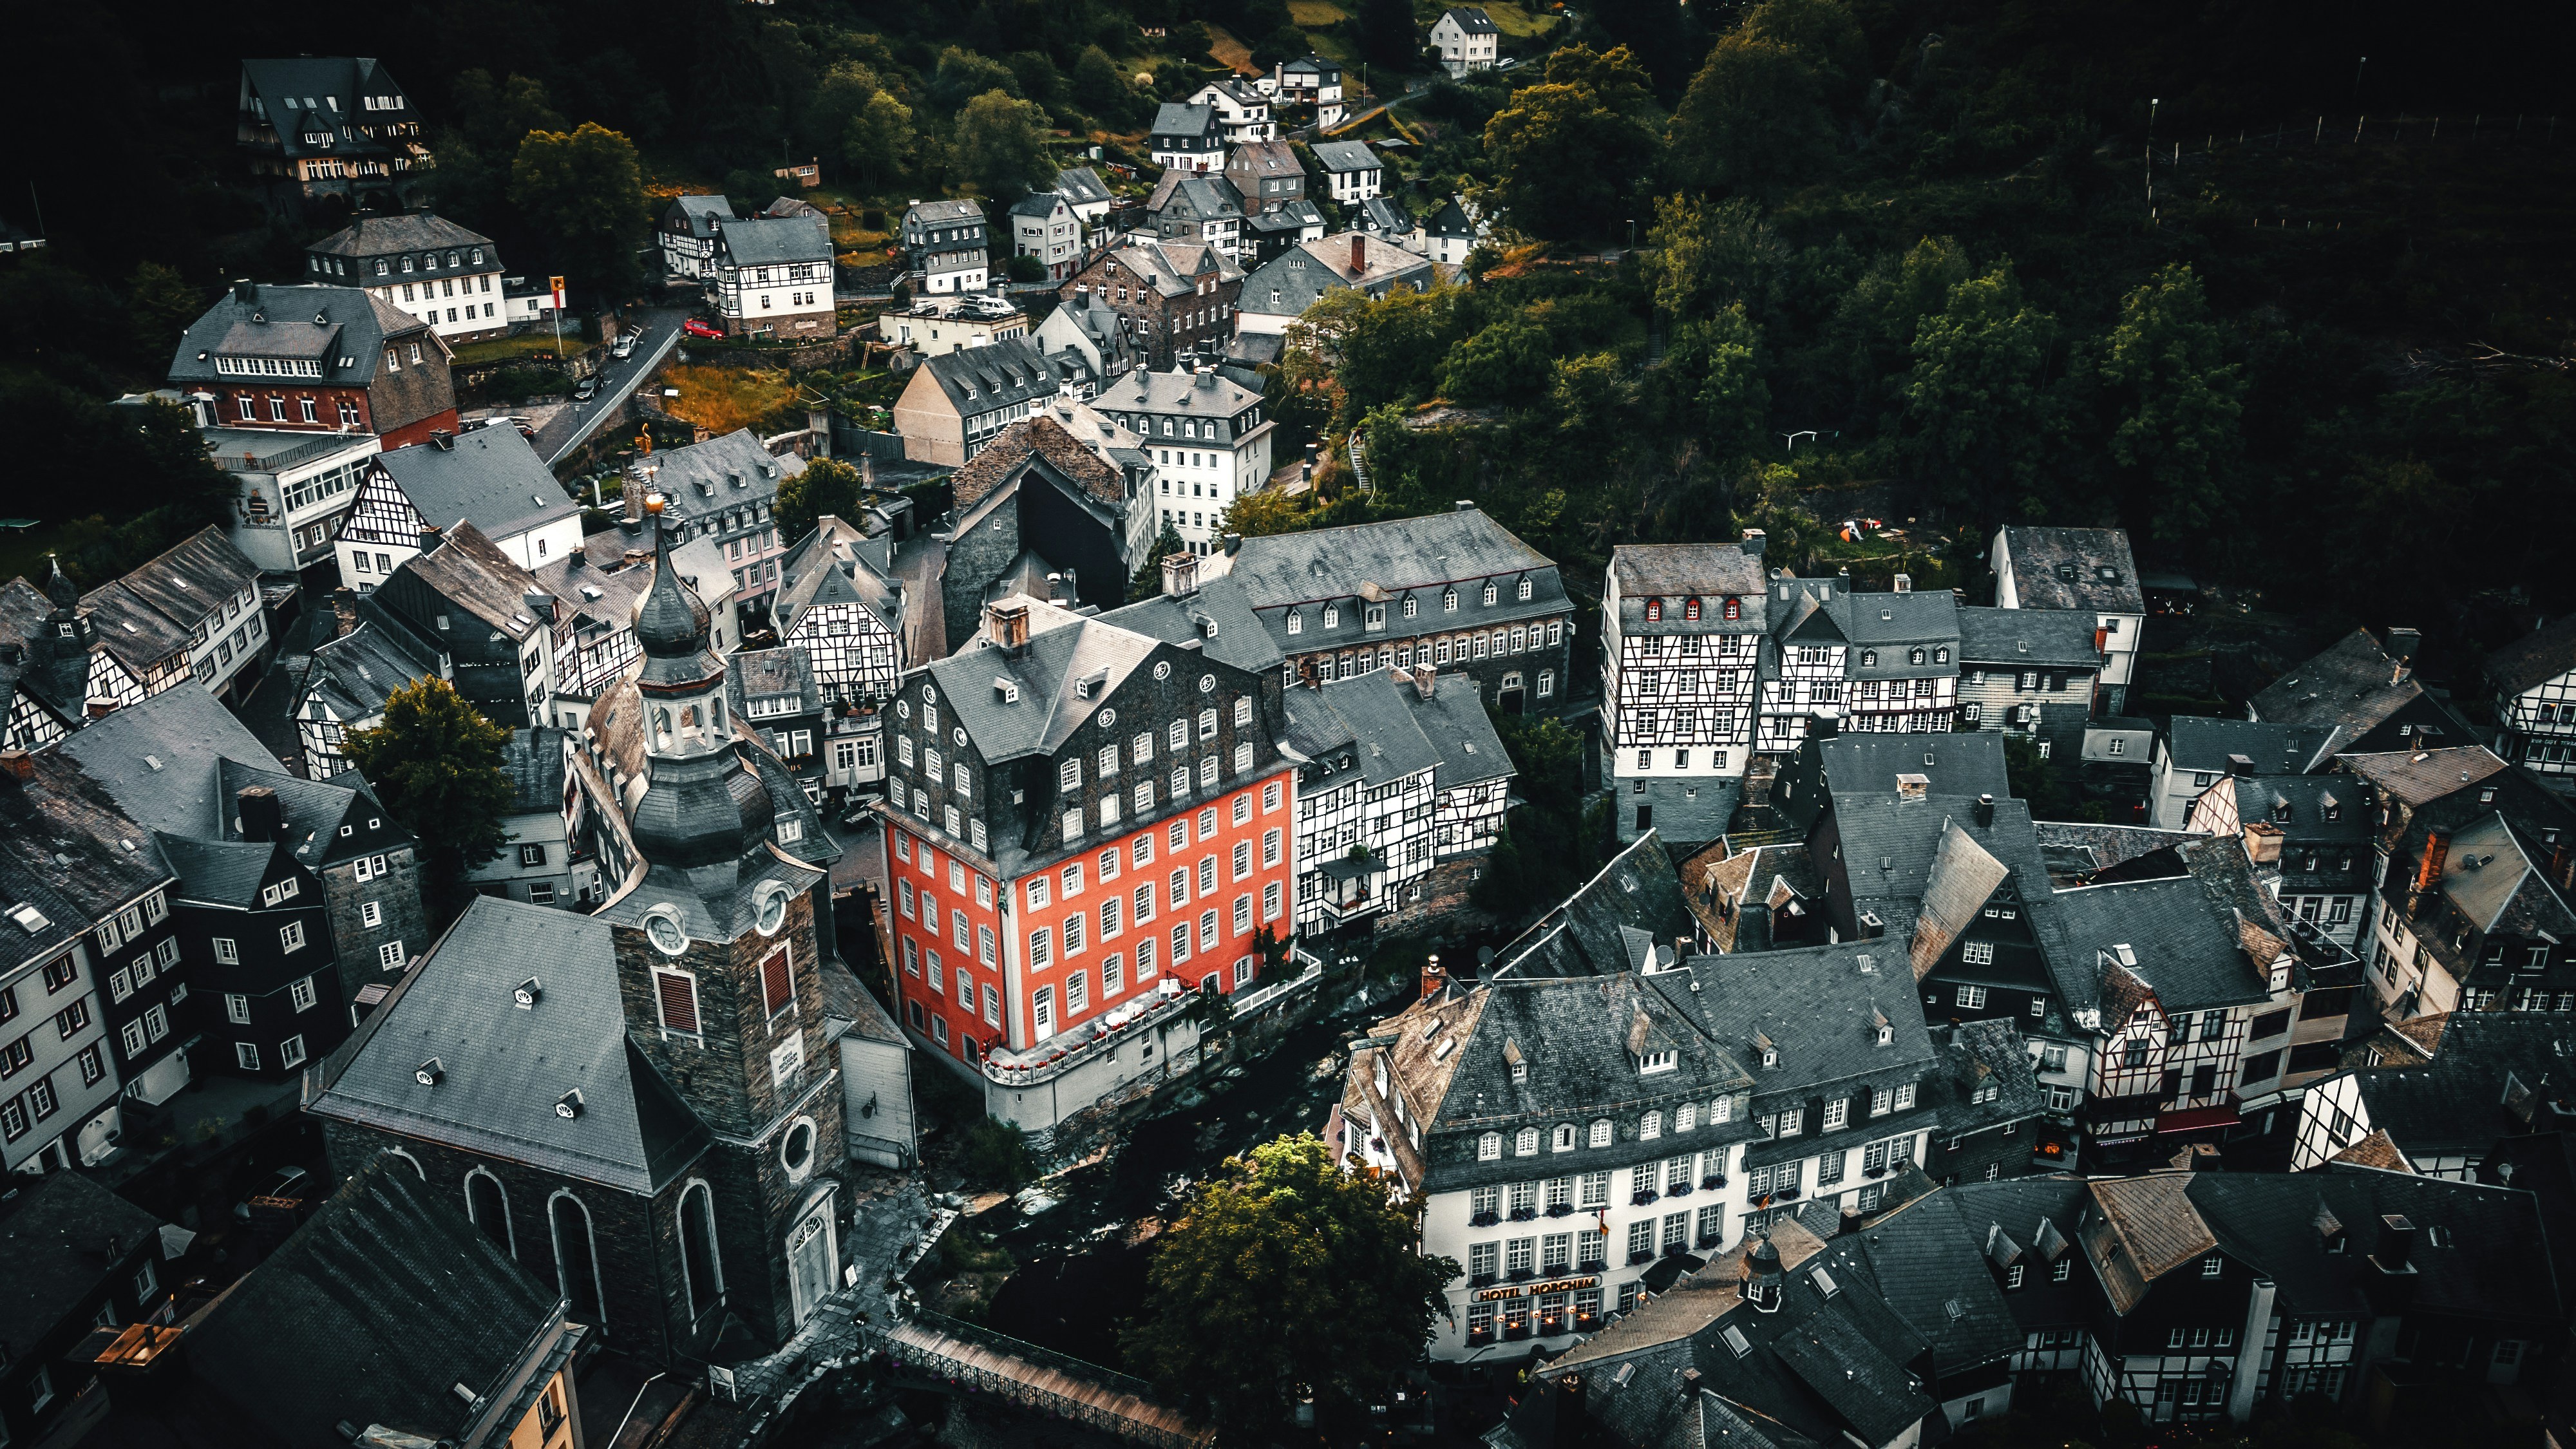 An aerial view on Monschau, showing the medieval town amongst the dense German forests.